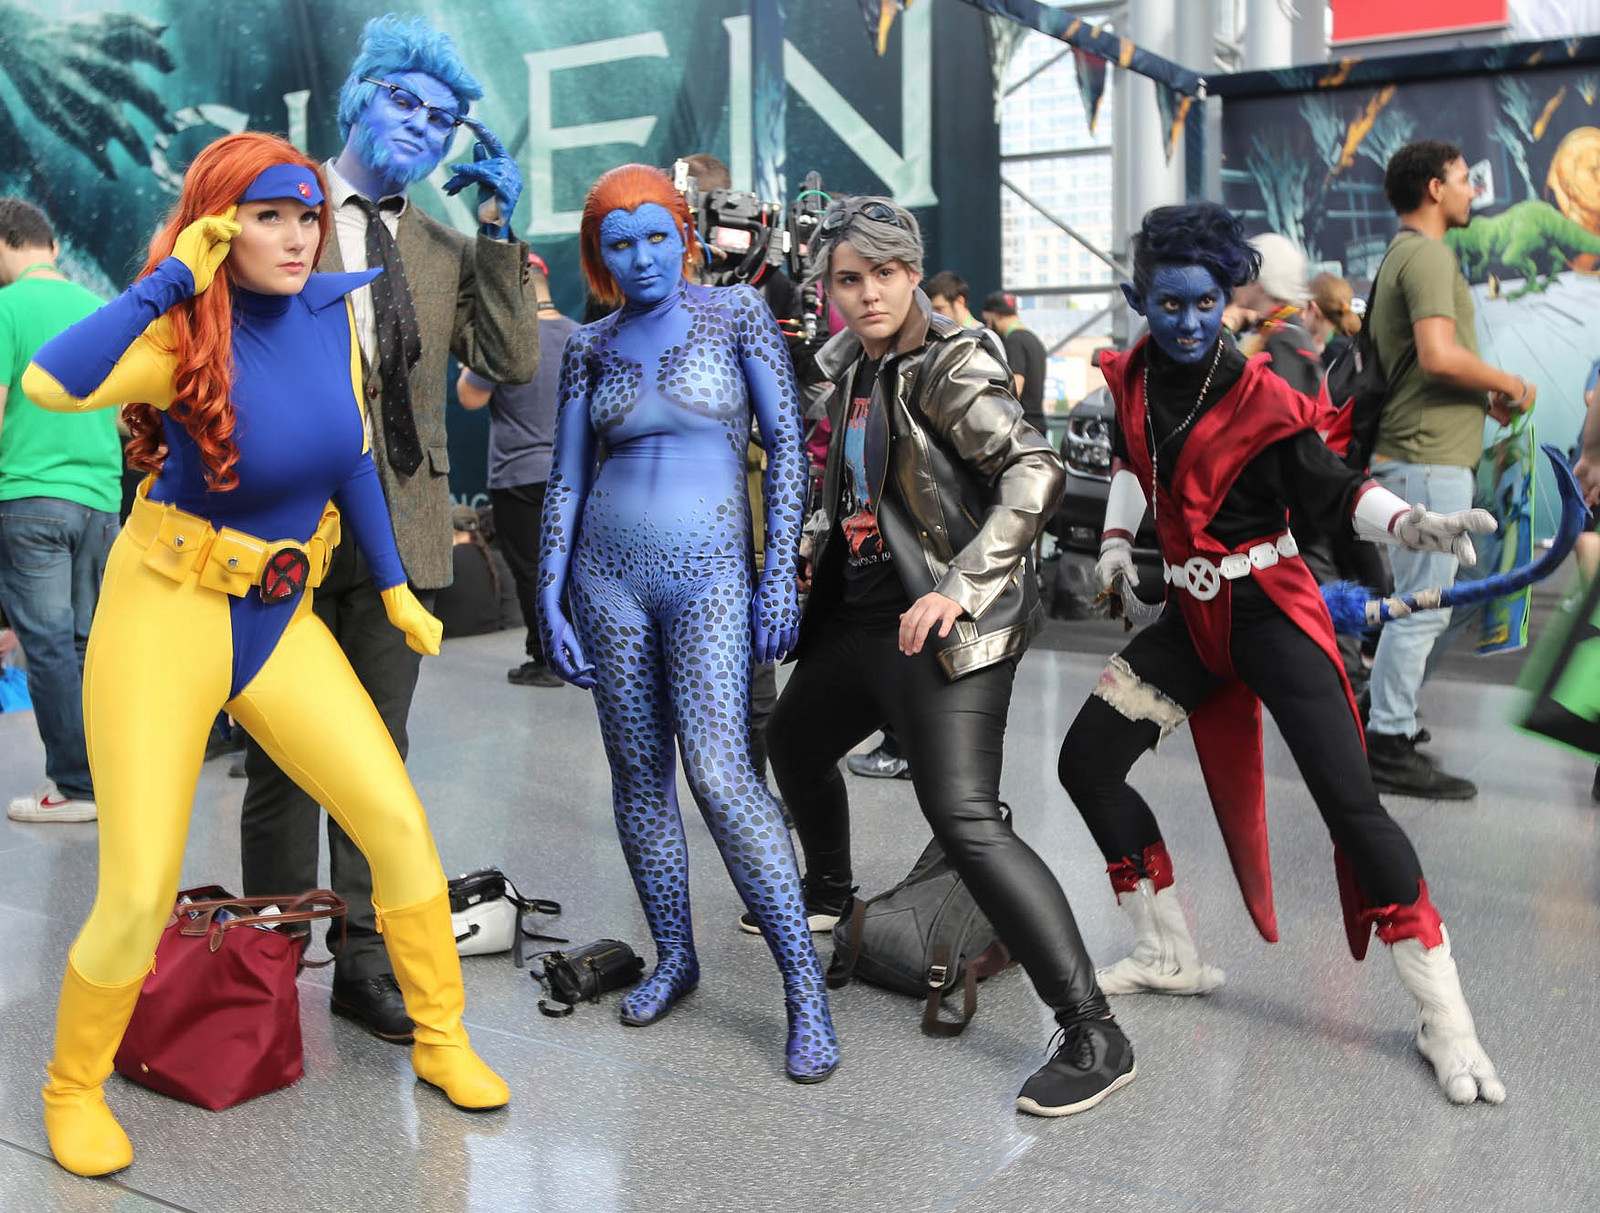 nycc13 Best Costumes from Comic Con in New York 2017